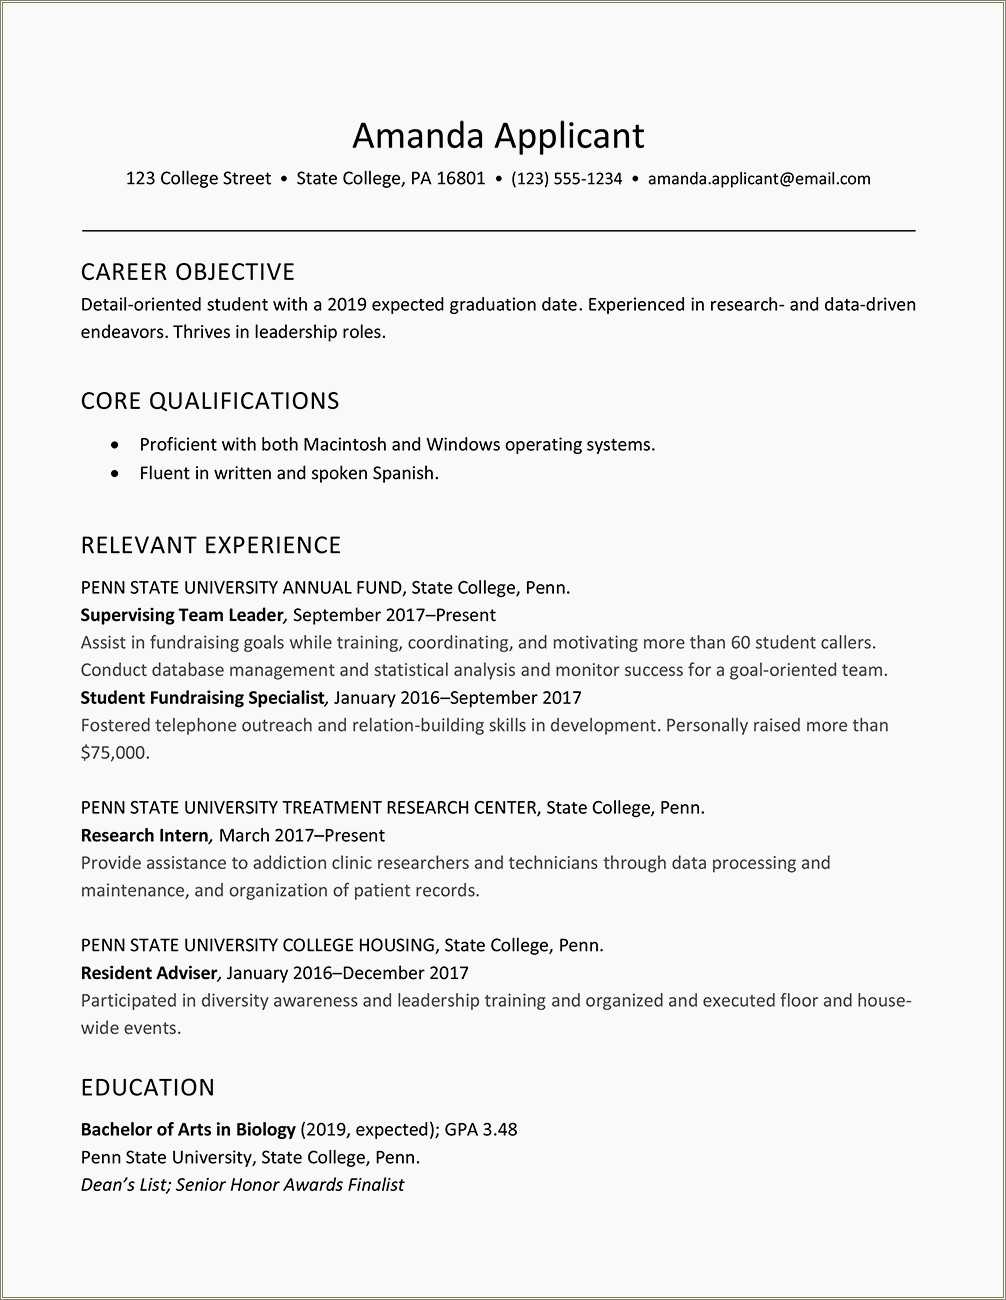 Examples Of Extra Curricular Activities On Resume - Resume Example Gallery